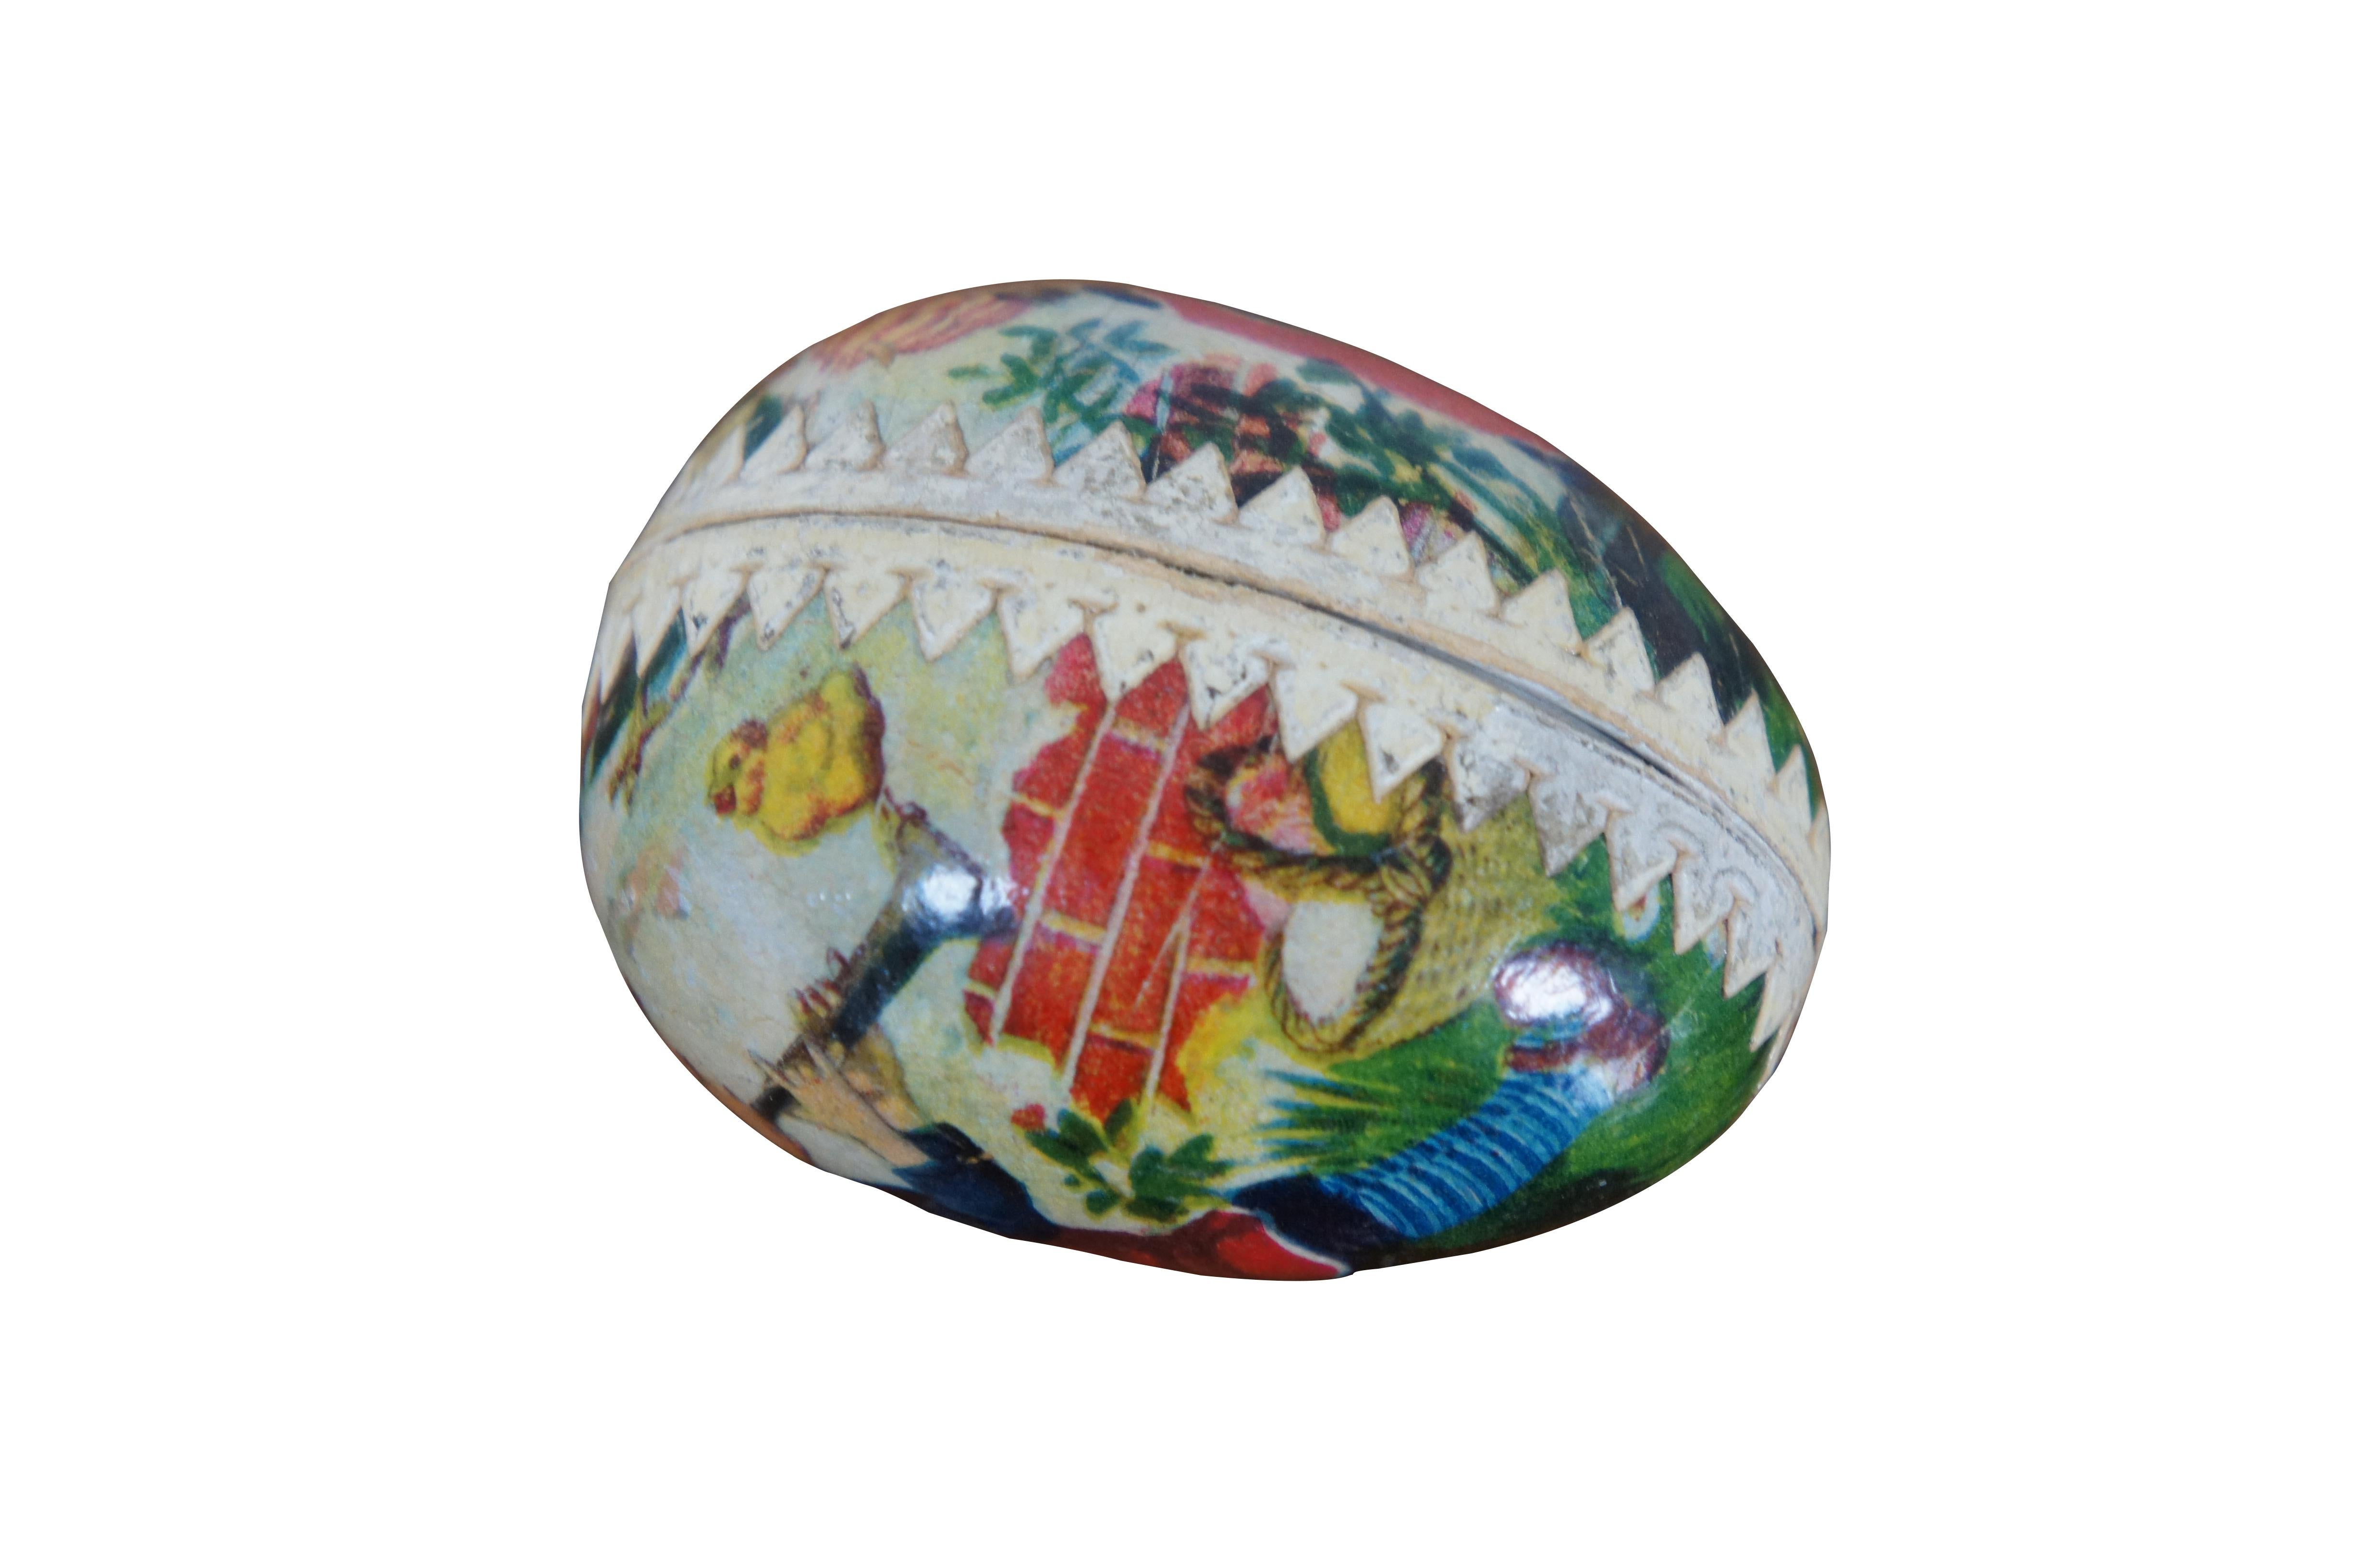 Antique lithographed paper mache Easter egg candy container featuring a boy playing his trumpet with chicks.  Made in Germany.

Dimensions:
2.25” x 1.5” x 1.75” (Width x Depth x Height)